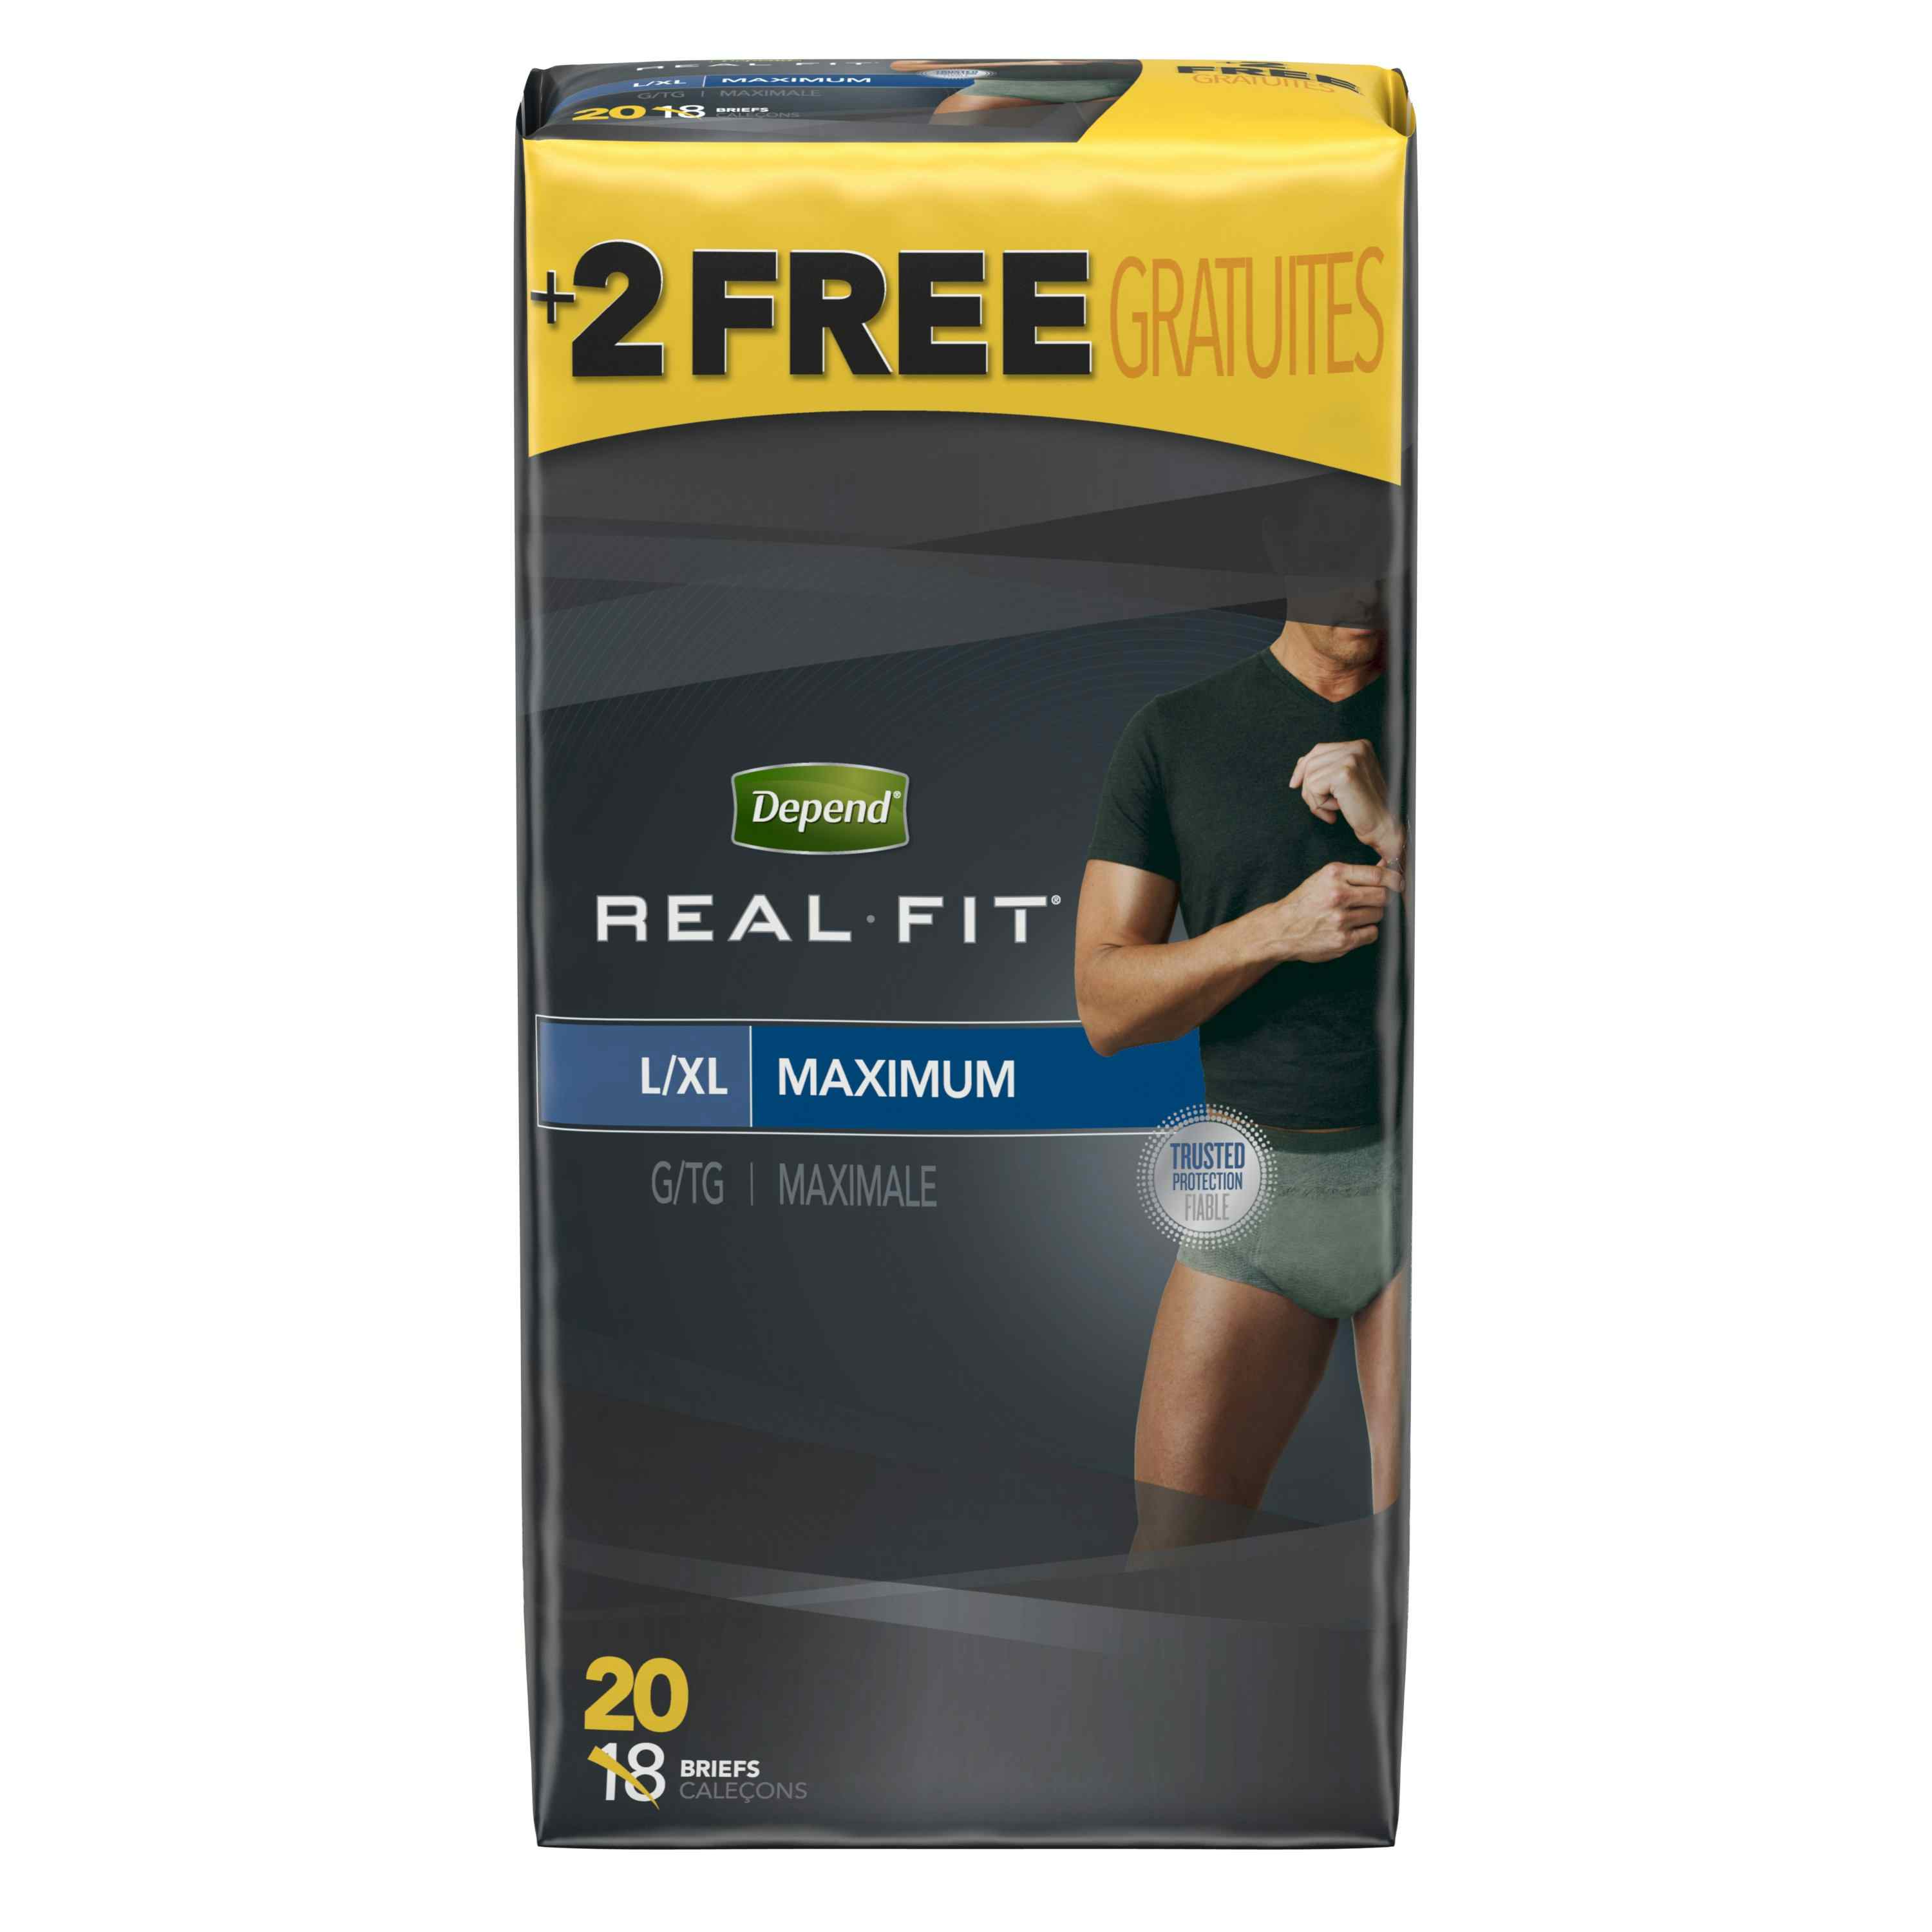 Depend Real Fit Disposable Male Adult Pull On Underwear with Tear Away Seams, Heavy Absorbency, 50979, Large/XL (38-50") - Pack of 20